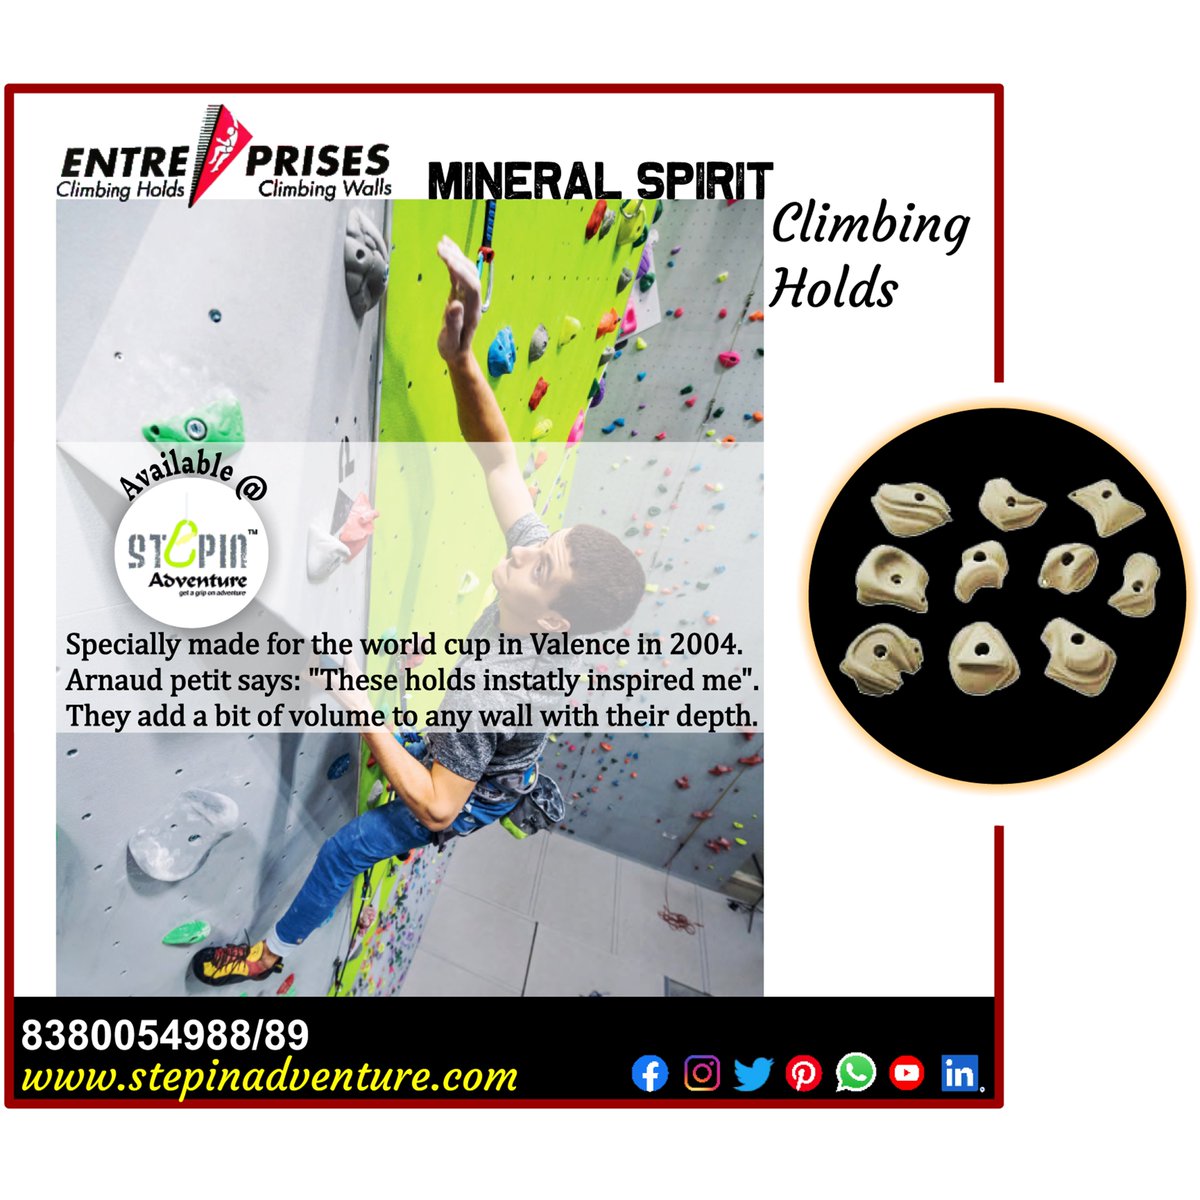 Full gallery of #cool #holds and #moves Check Out Here
bit.ly/2SsSi3R
#boulderinglife #bouldergym #gymclimbing #routsetter #routeclimbing #routesettingeveryday #climbingvolumes
#newboulders #indoorclimbing 
#ICP #ClimbICP #makeyourmove #ICPmakeyourmove 
#climbingisfun